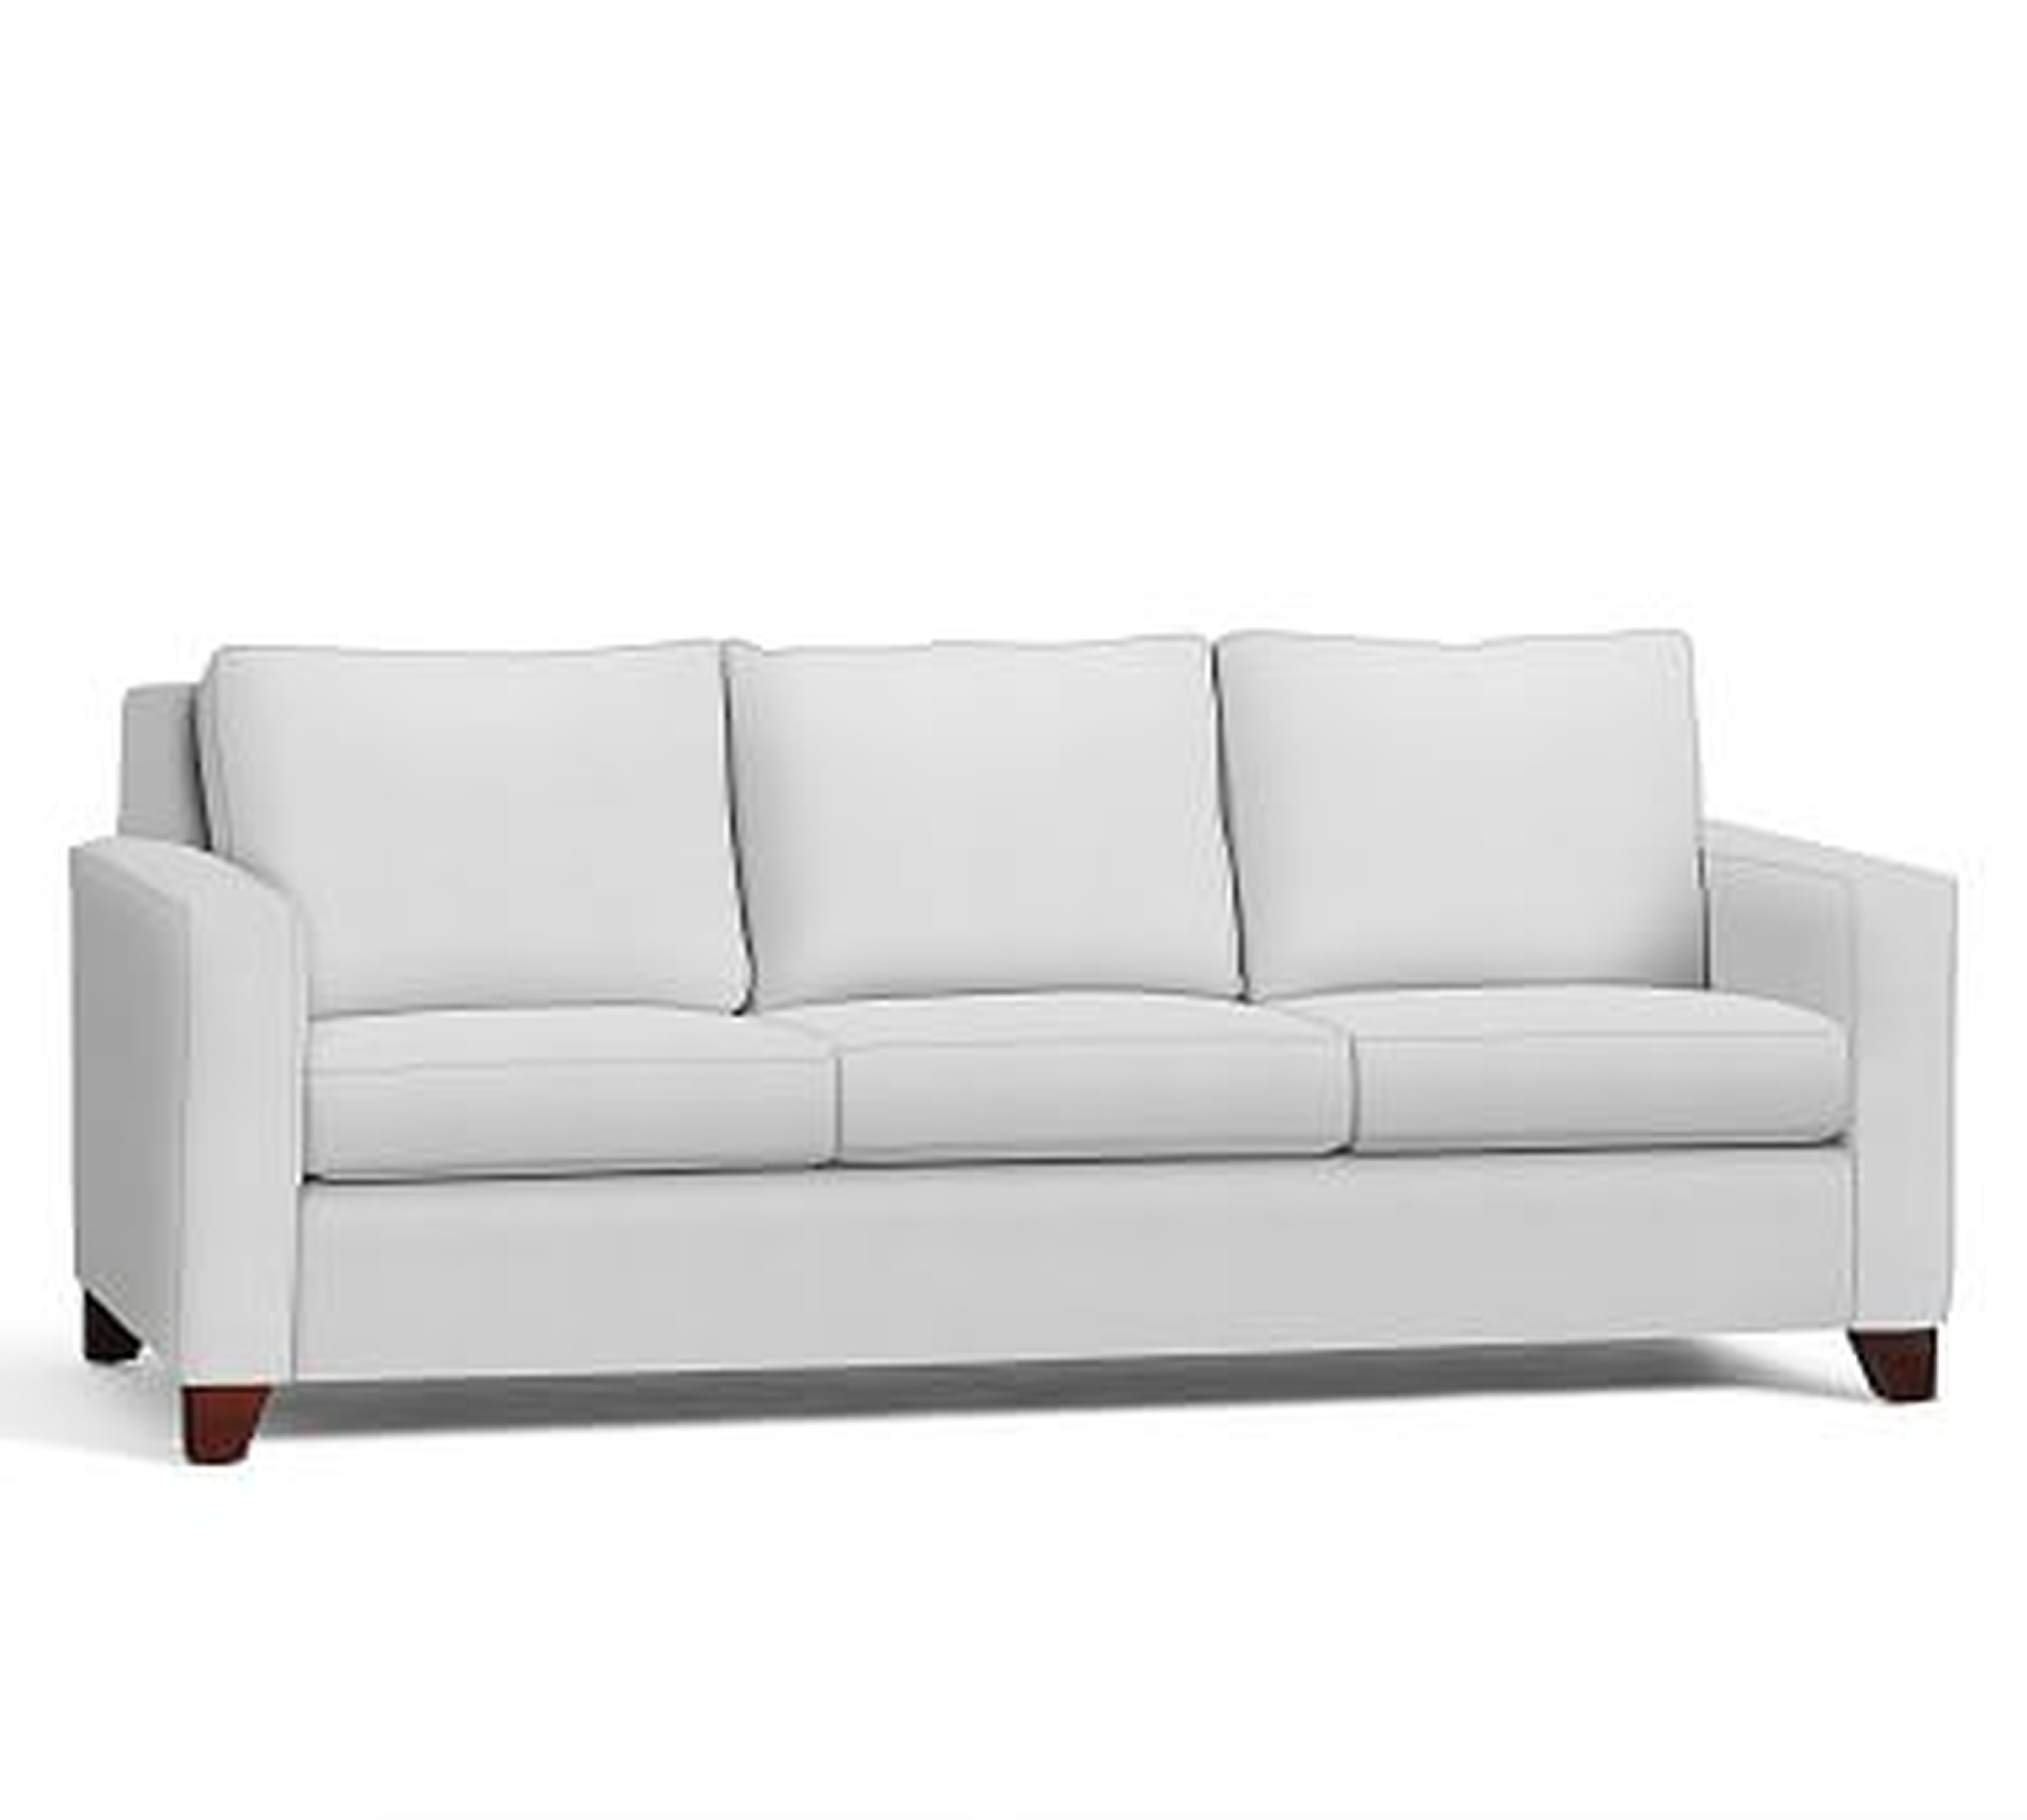 Cameron Square Arm Upholstered Grand Sofa 96" 3-Seater, Polyester Wrapped Cushions, Performance Twill Warm White - Pottery Barn